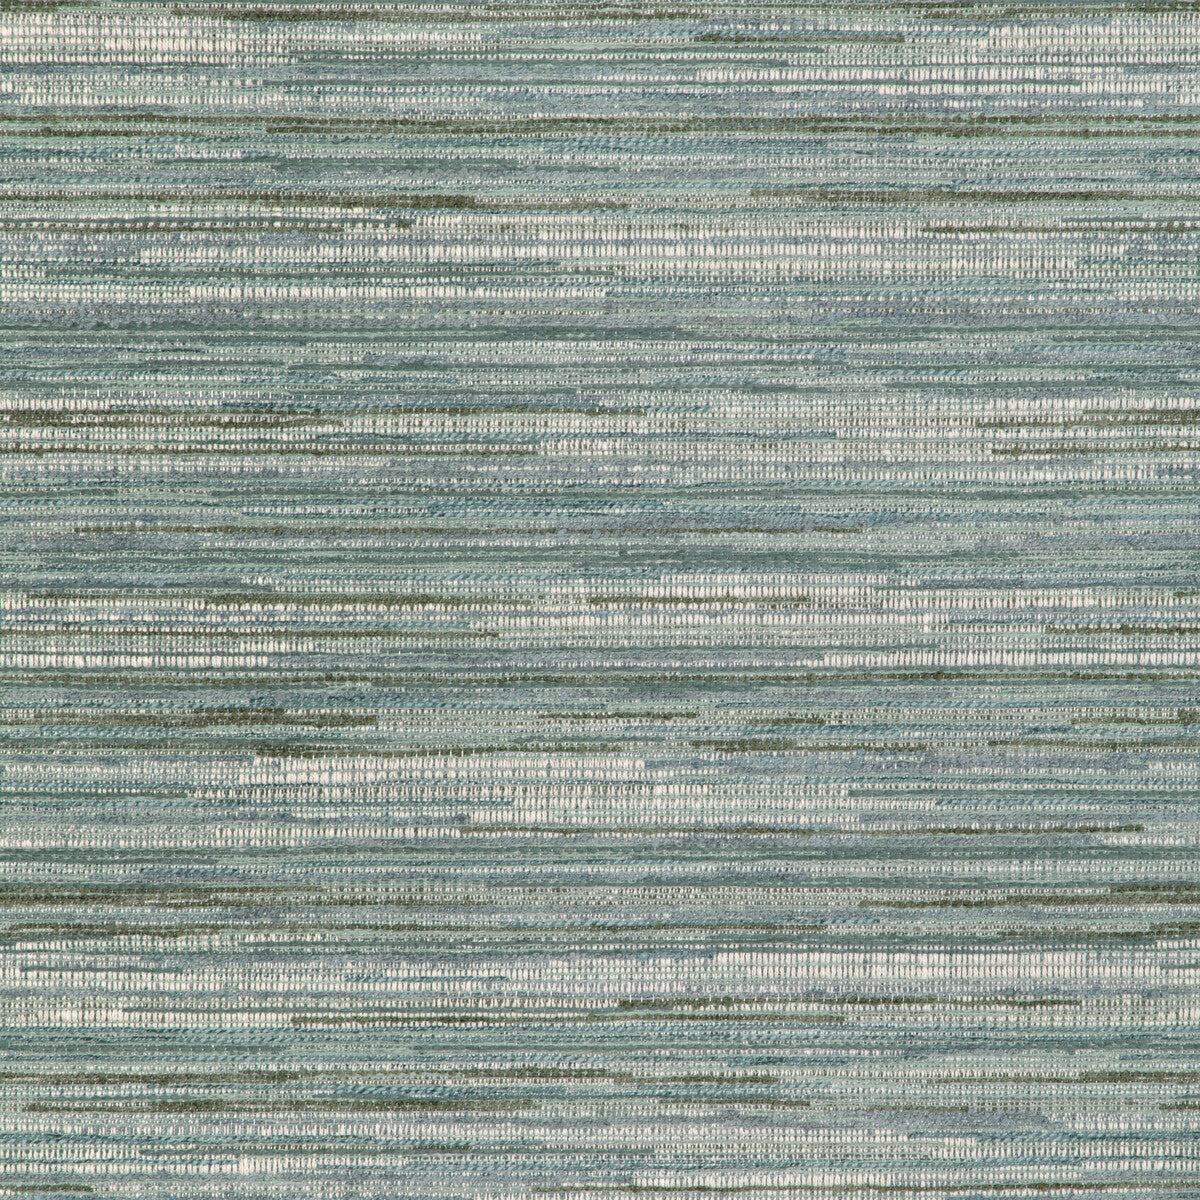 Kravet Design fabric in 37117-1535 color - pattern 37117.1535.0 - by Kravet Design in the Woven Colors collection